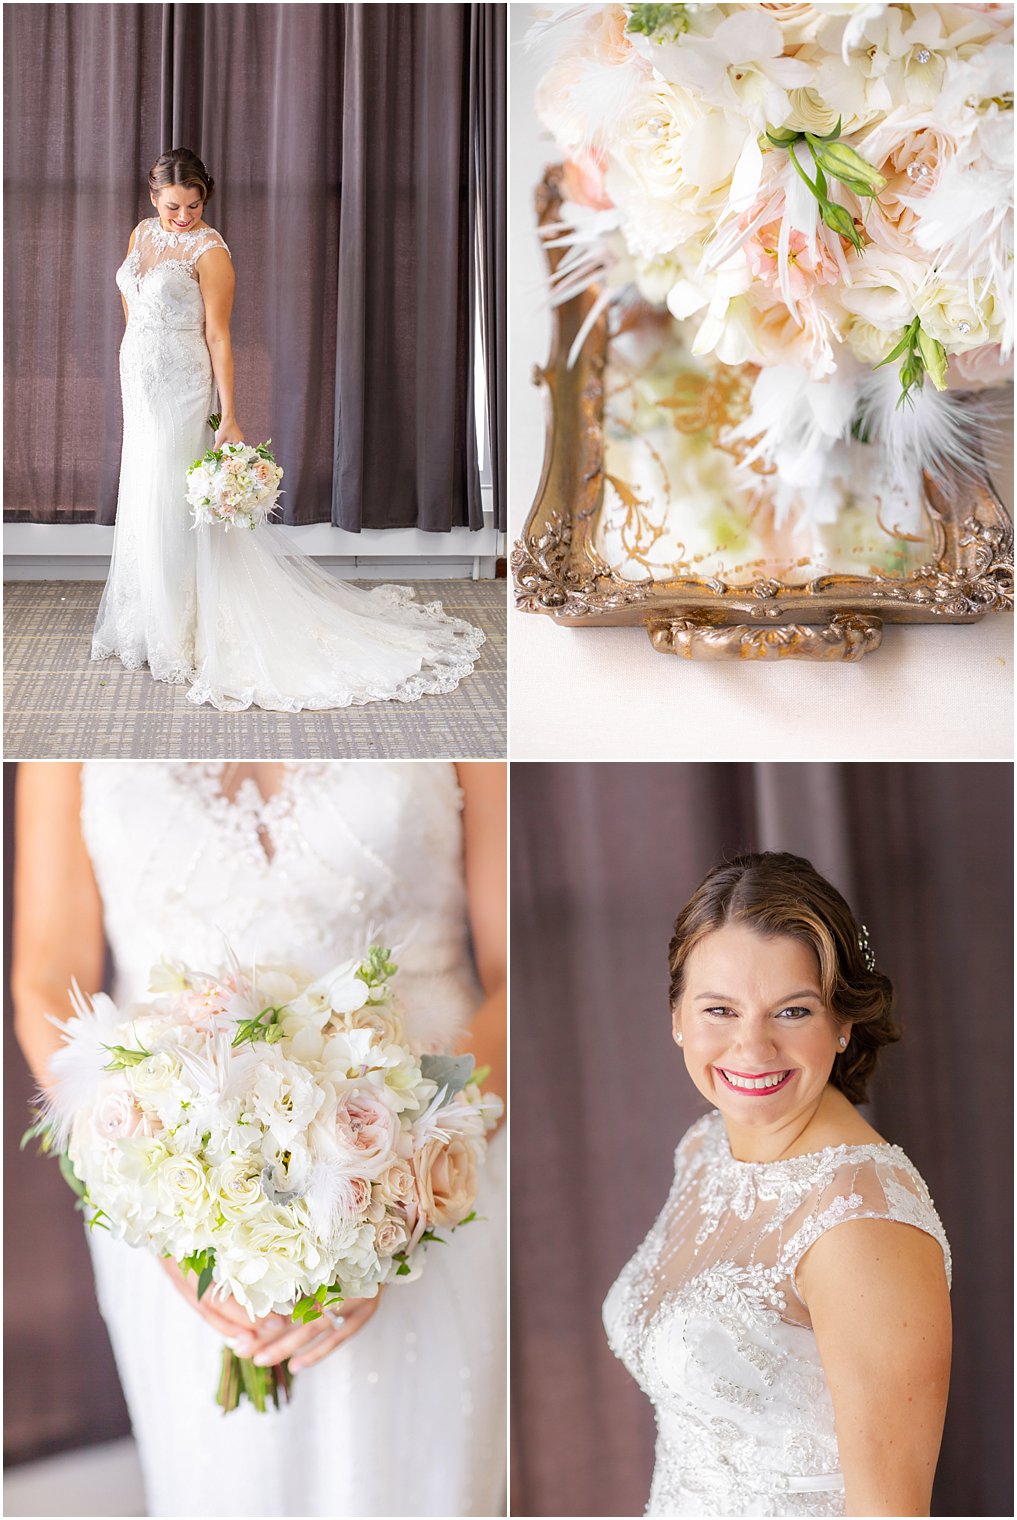 Pale pink, ivory and green wedding bouquet with feather accents by Flowerful Events